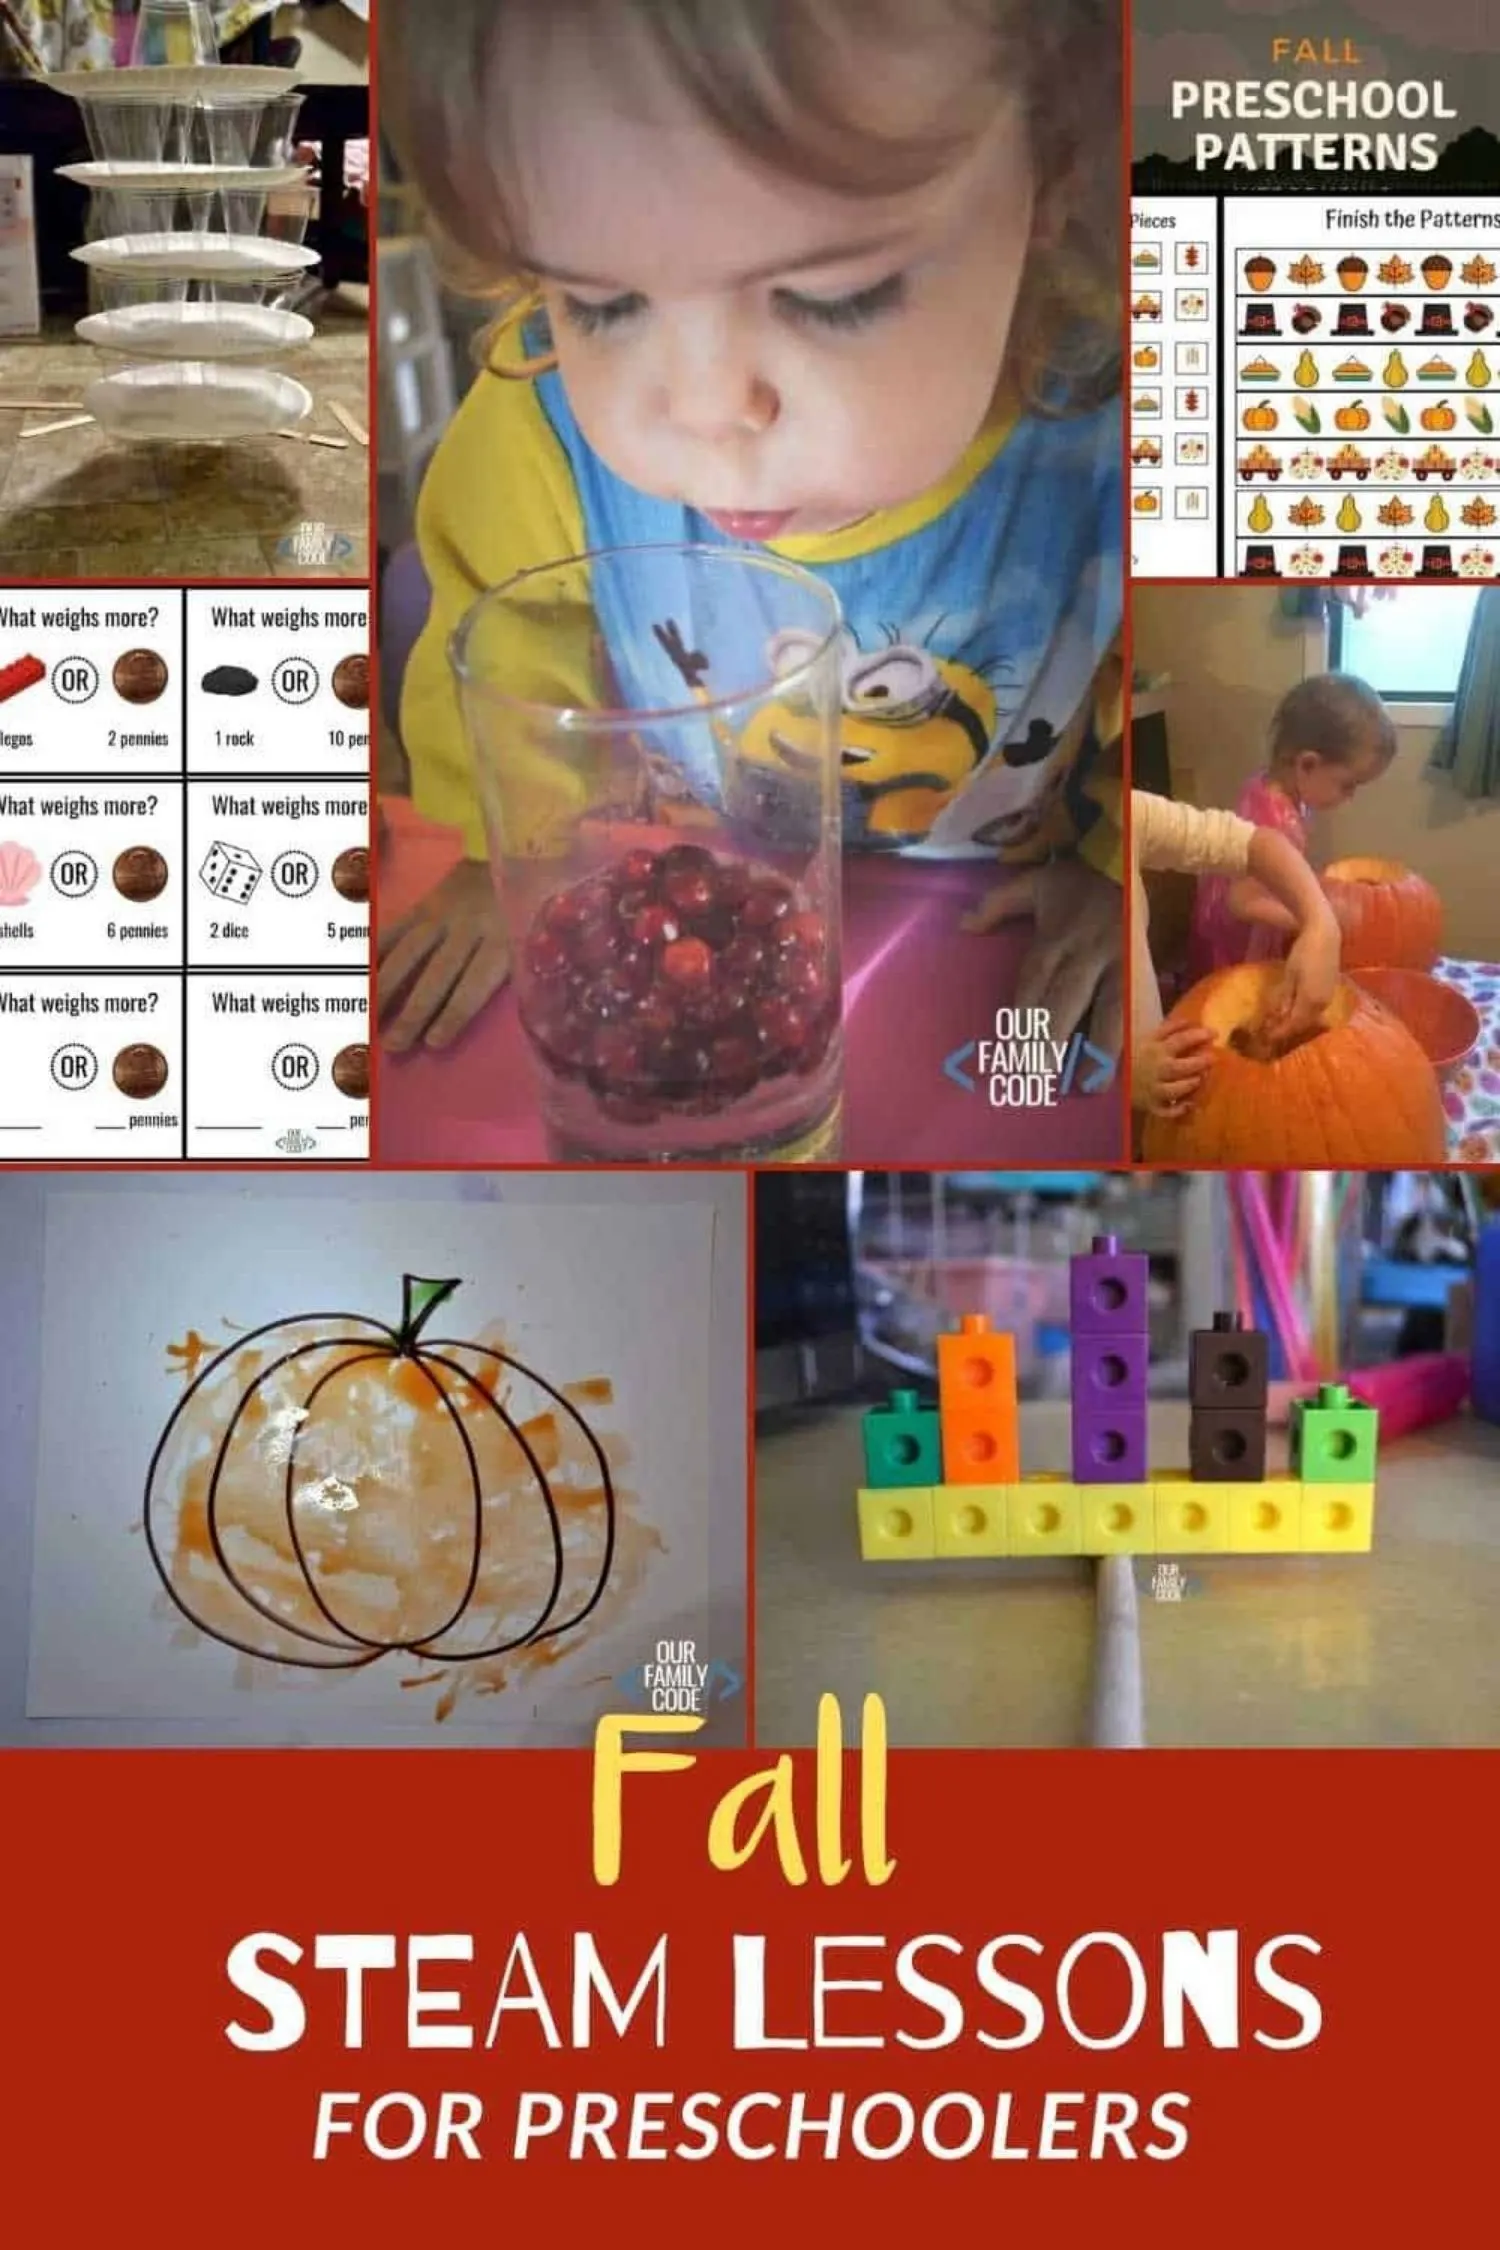 Fall STEAM Lessons for Preschoolers 